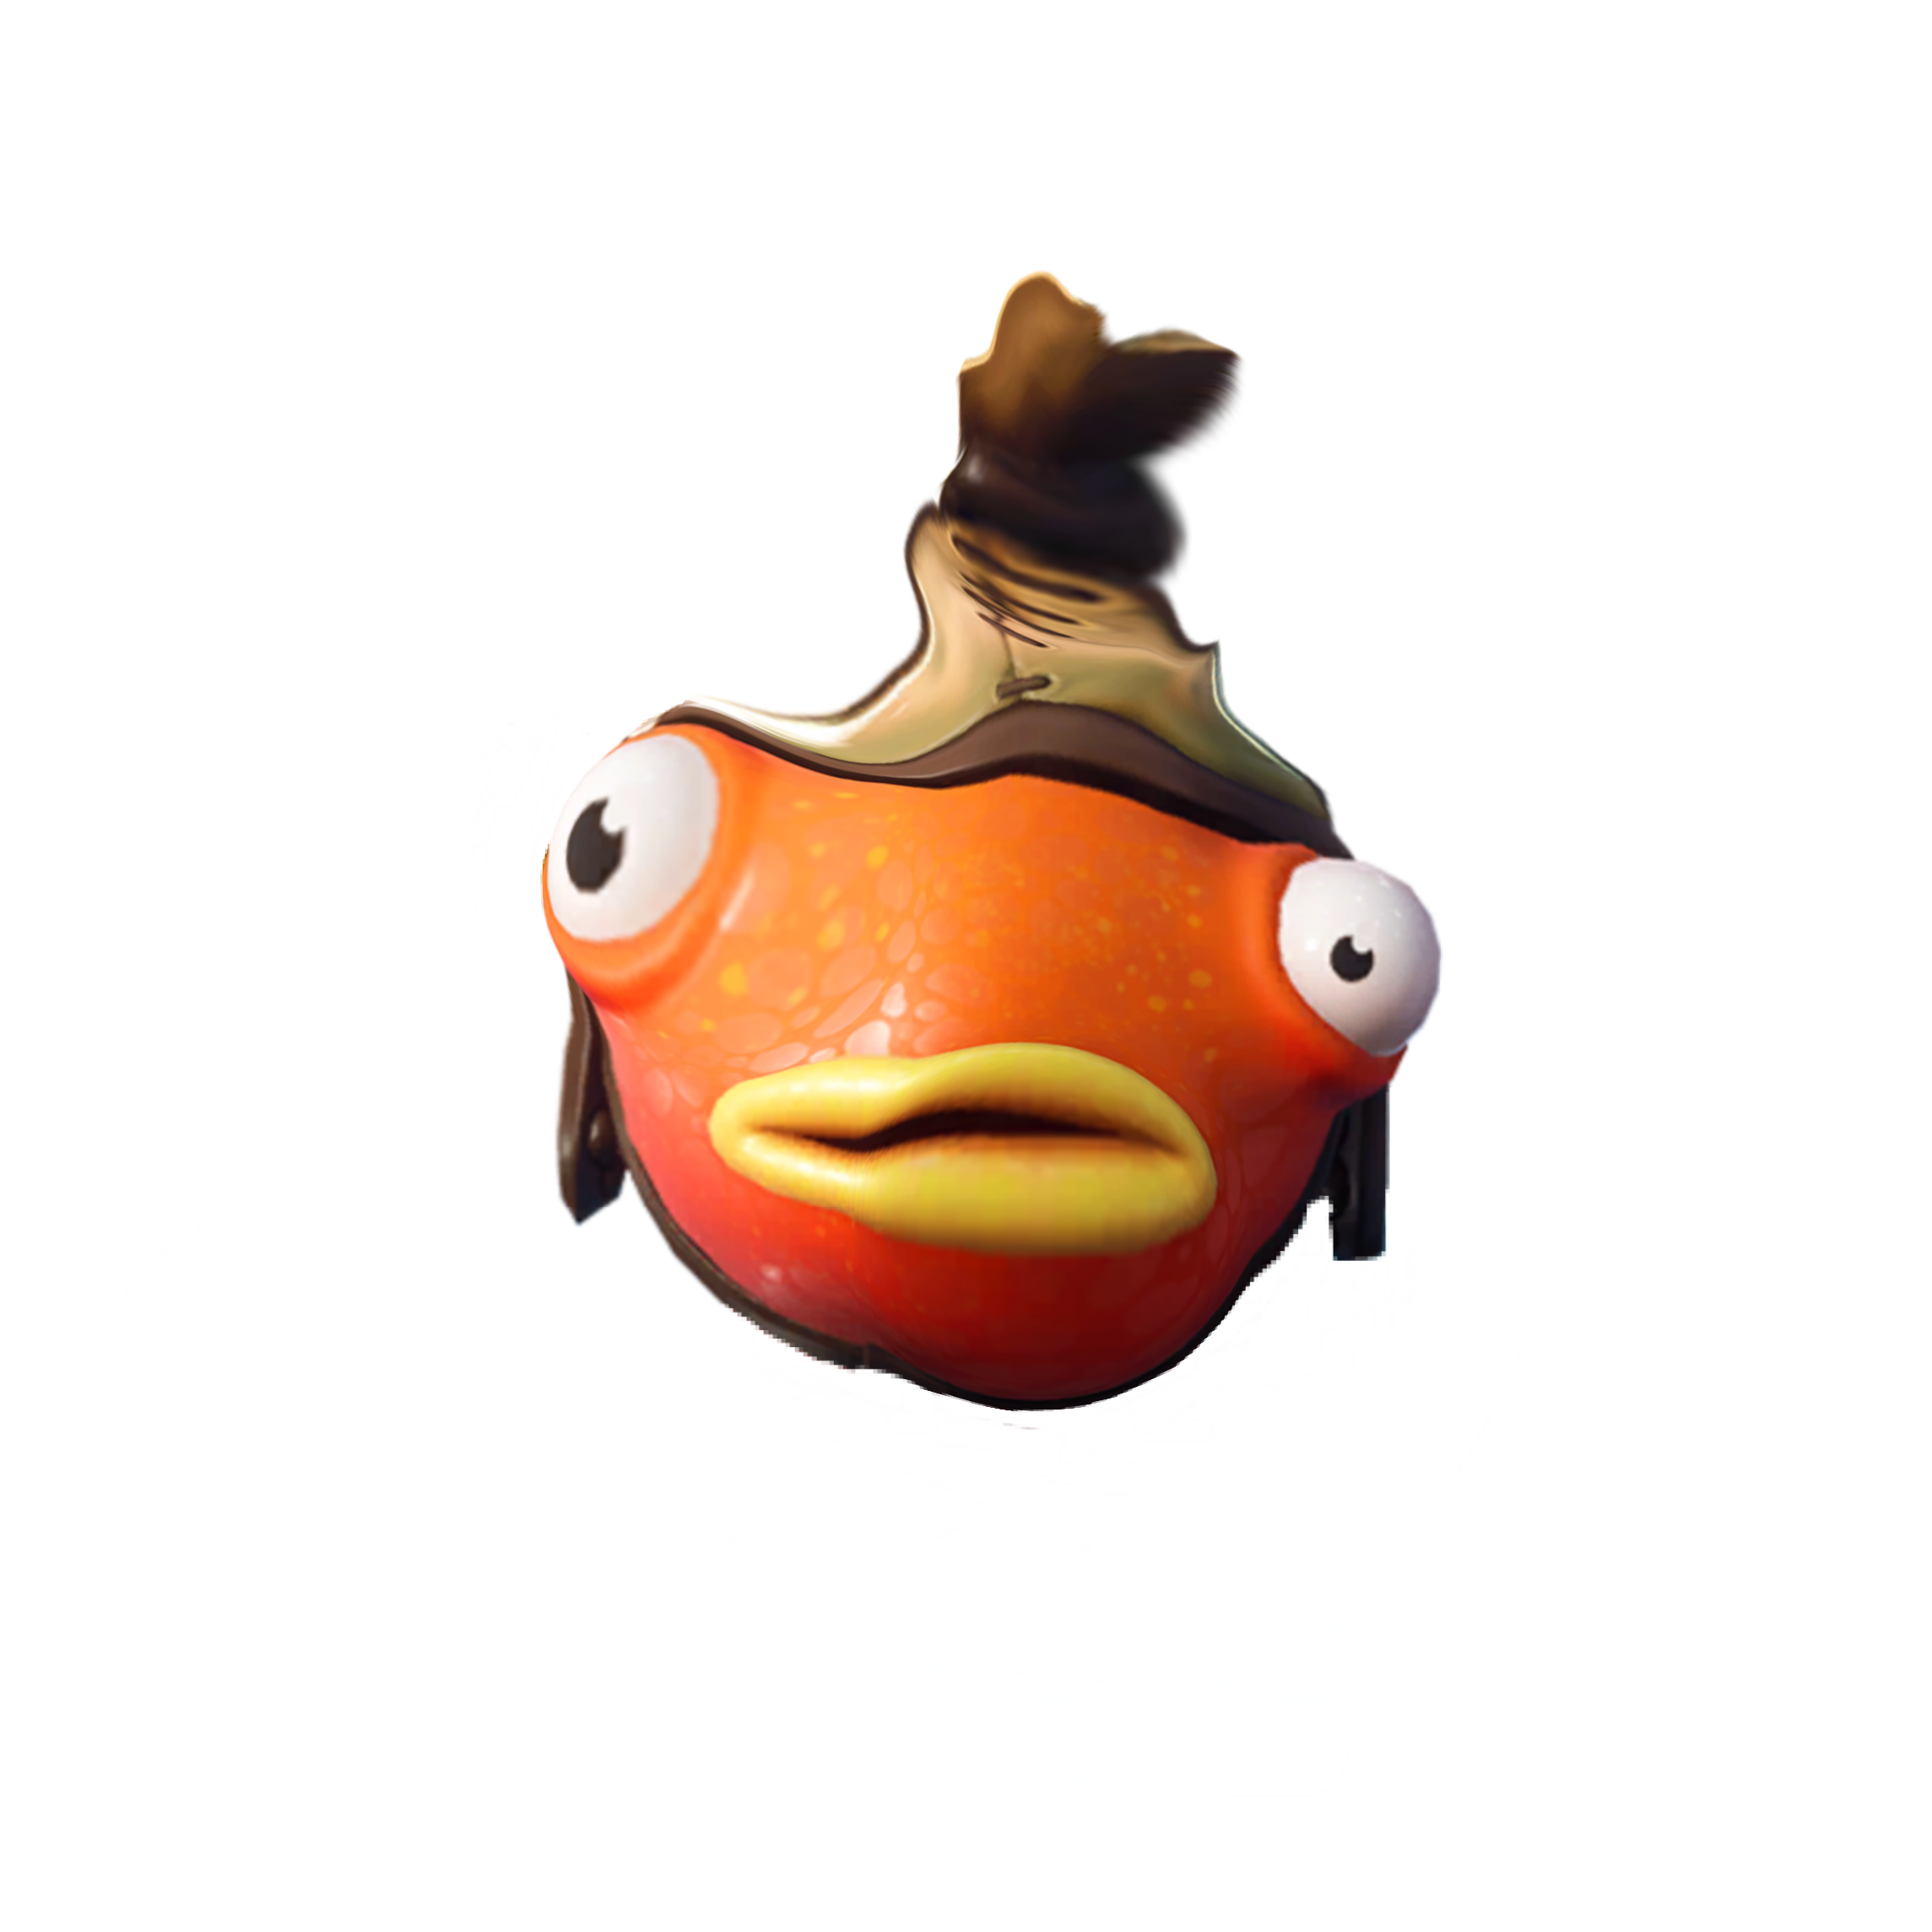 Popular and Trending fishstick Stickers on PicsArt - 240 x 240 png 37kB